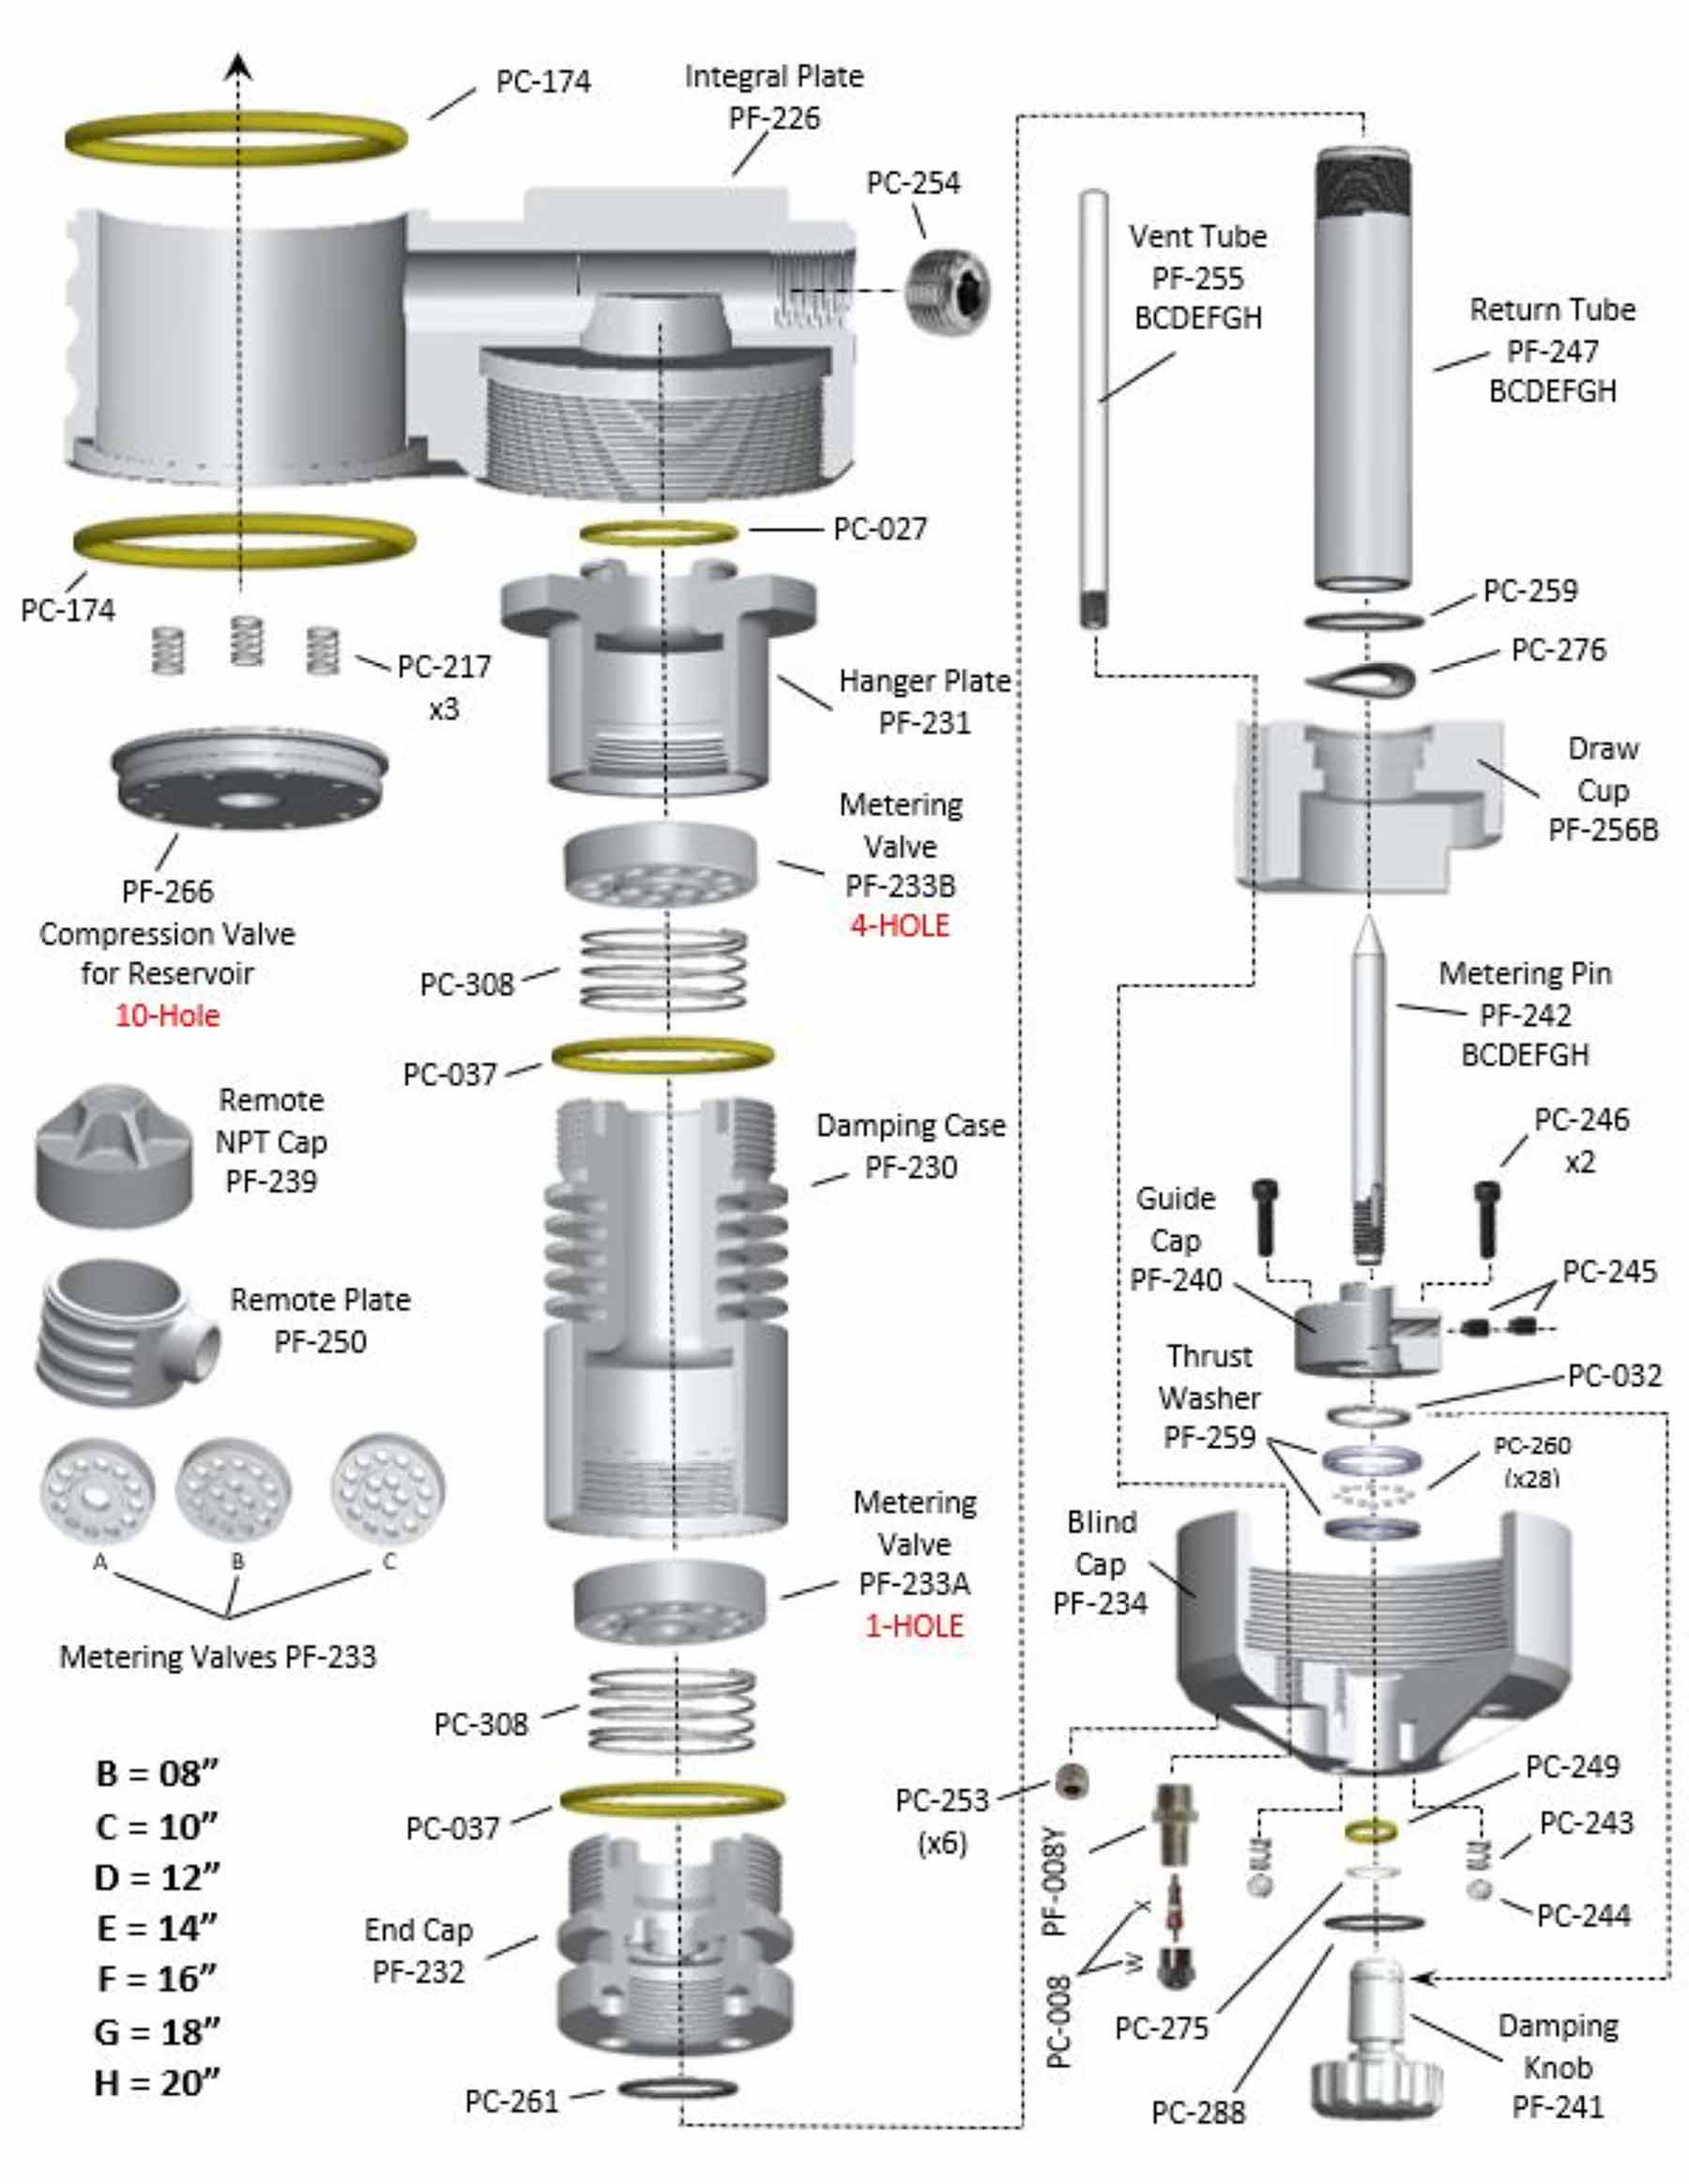 Exploded View of the STX Strut Reservoir